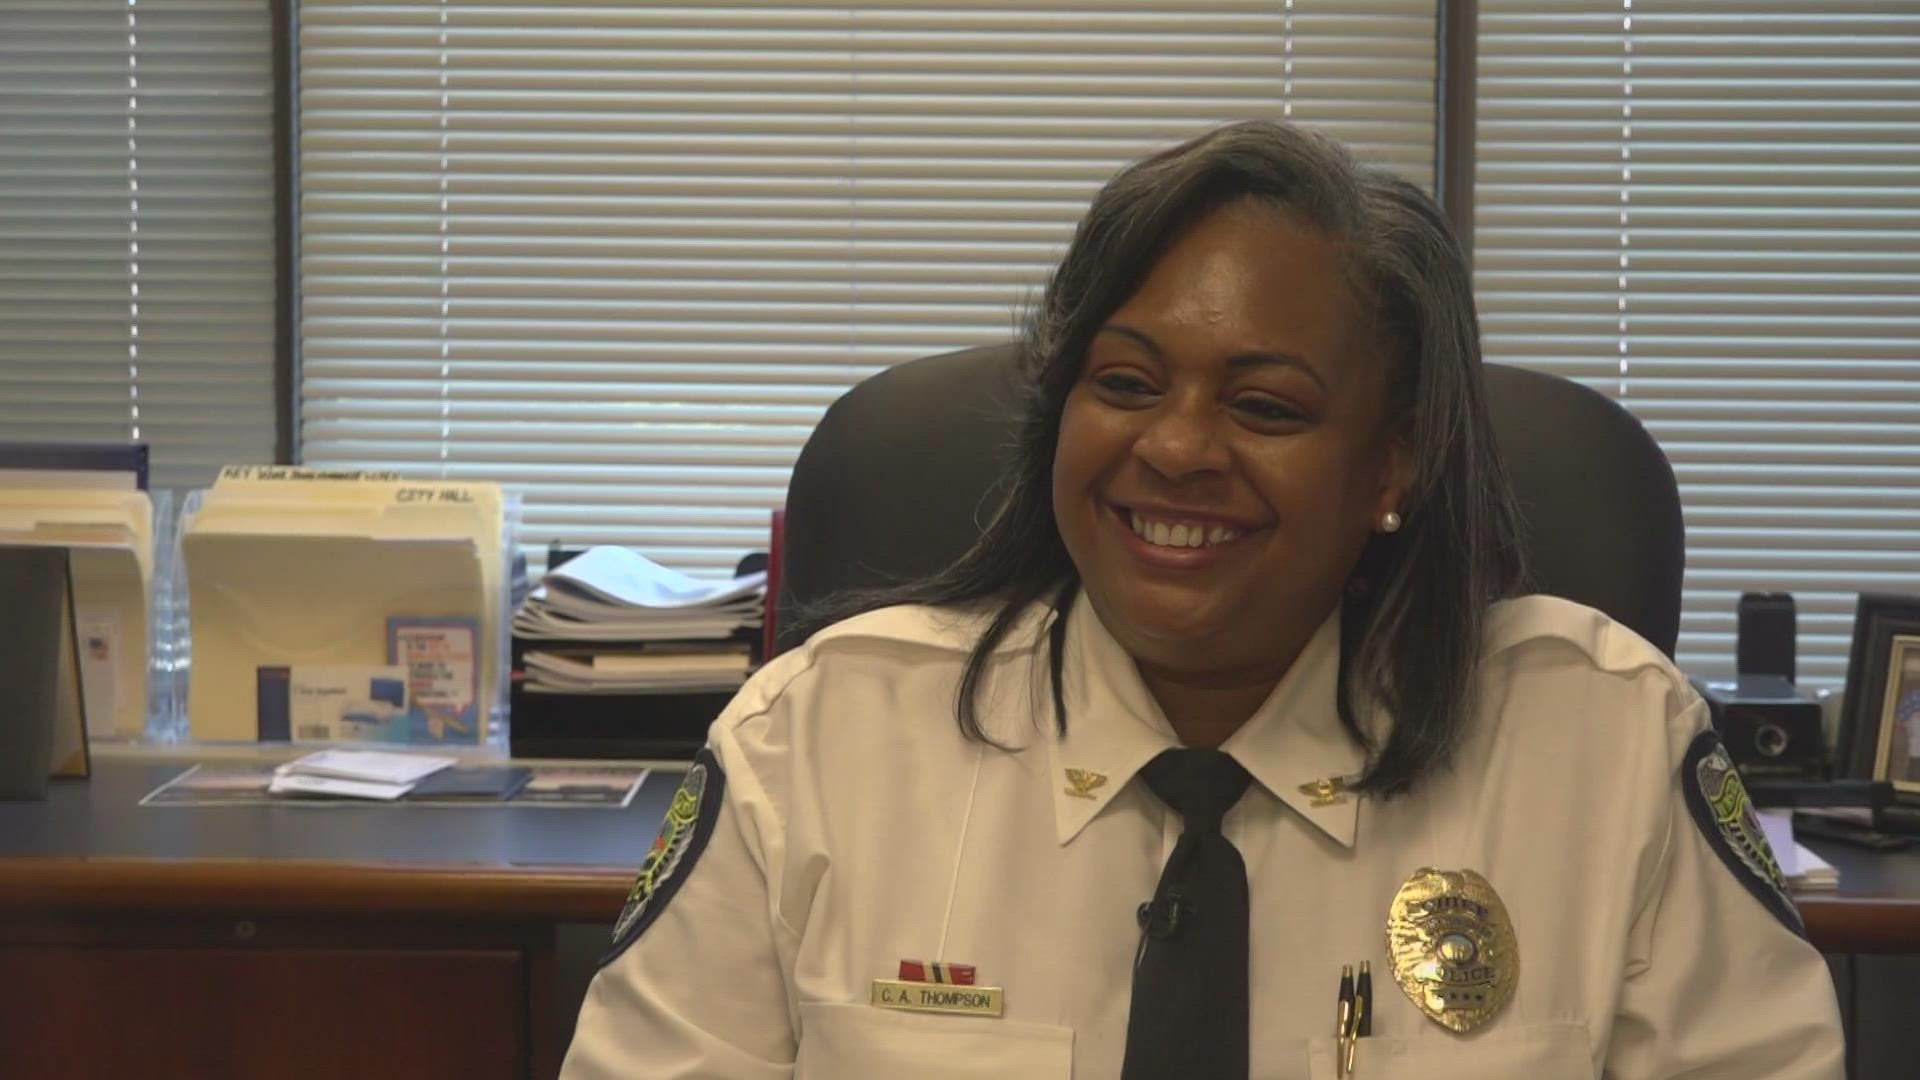 Chief Catrina Thompson announced she will leave the department at the end of 2022.